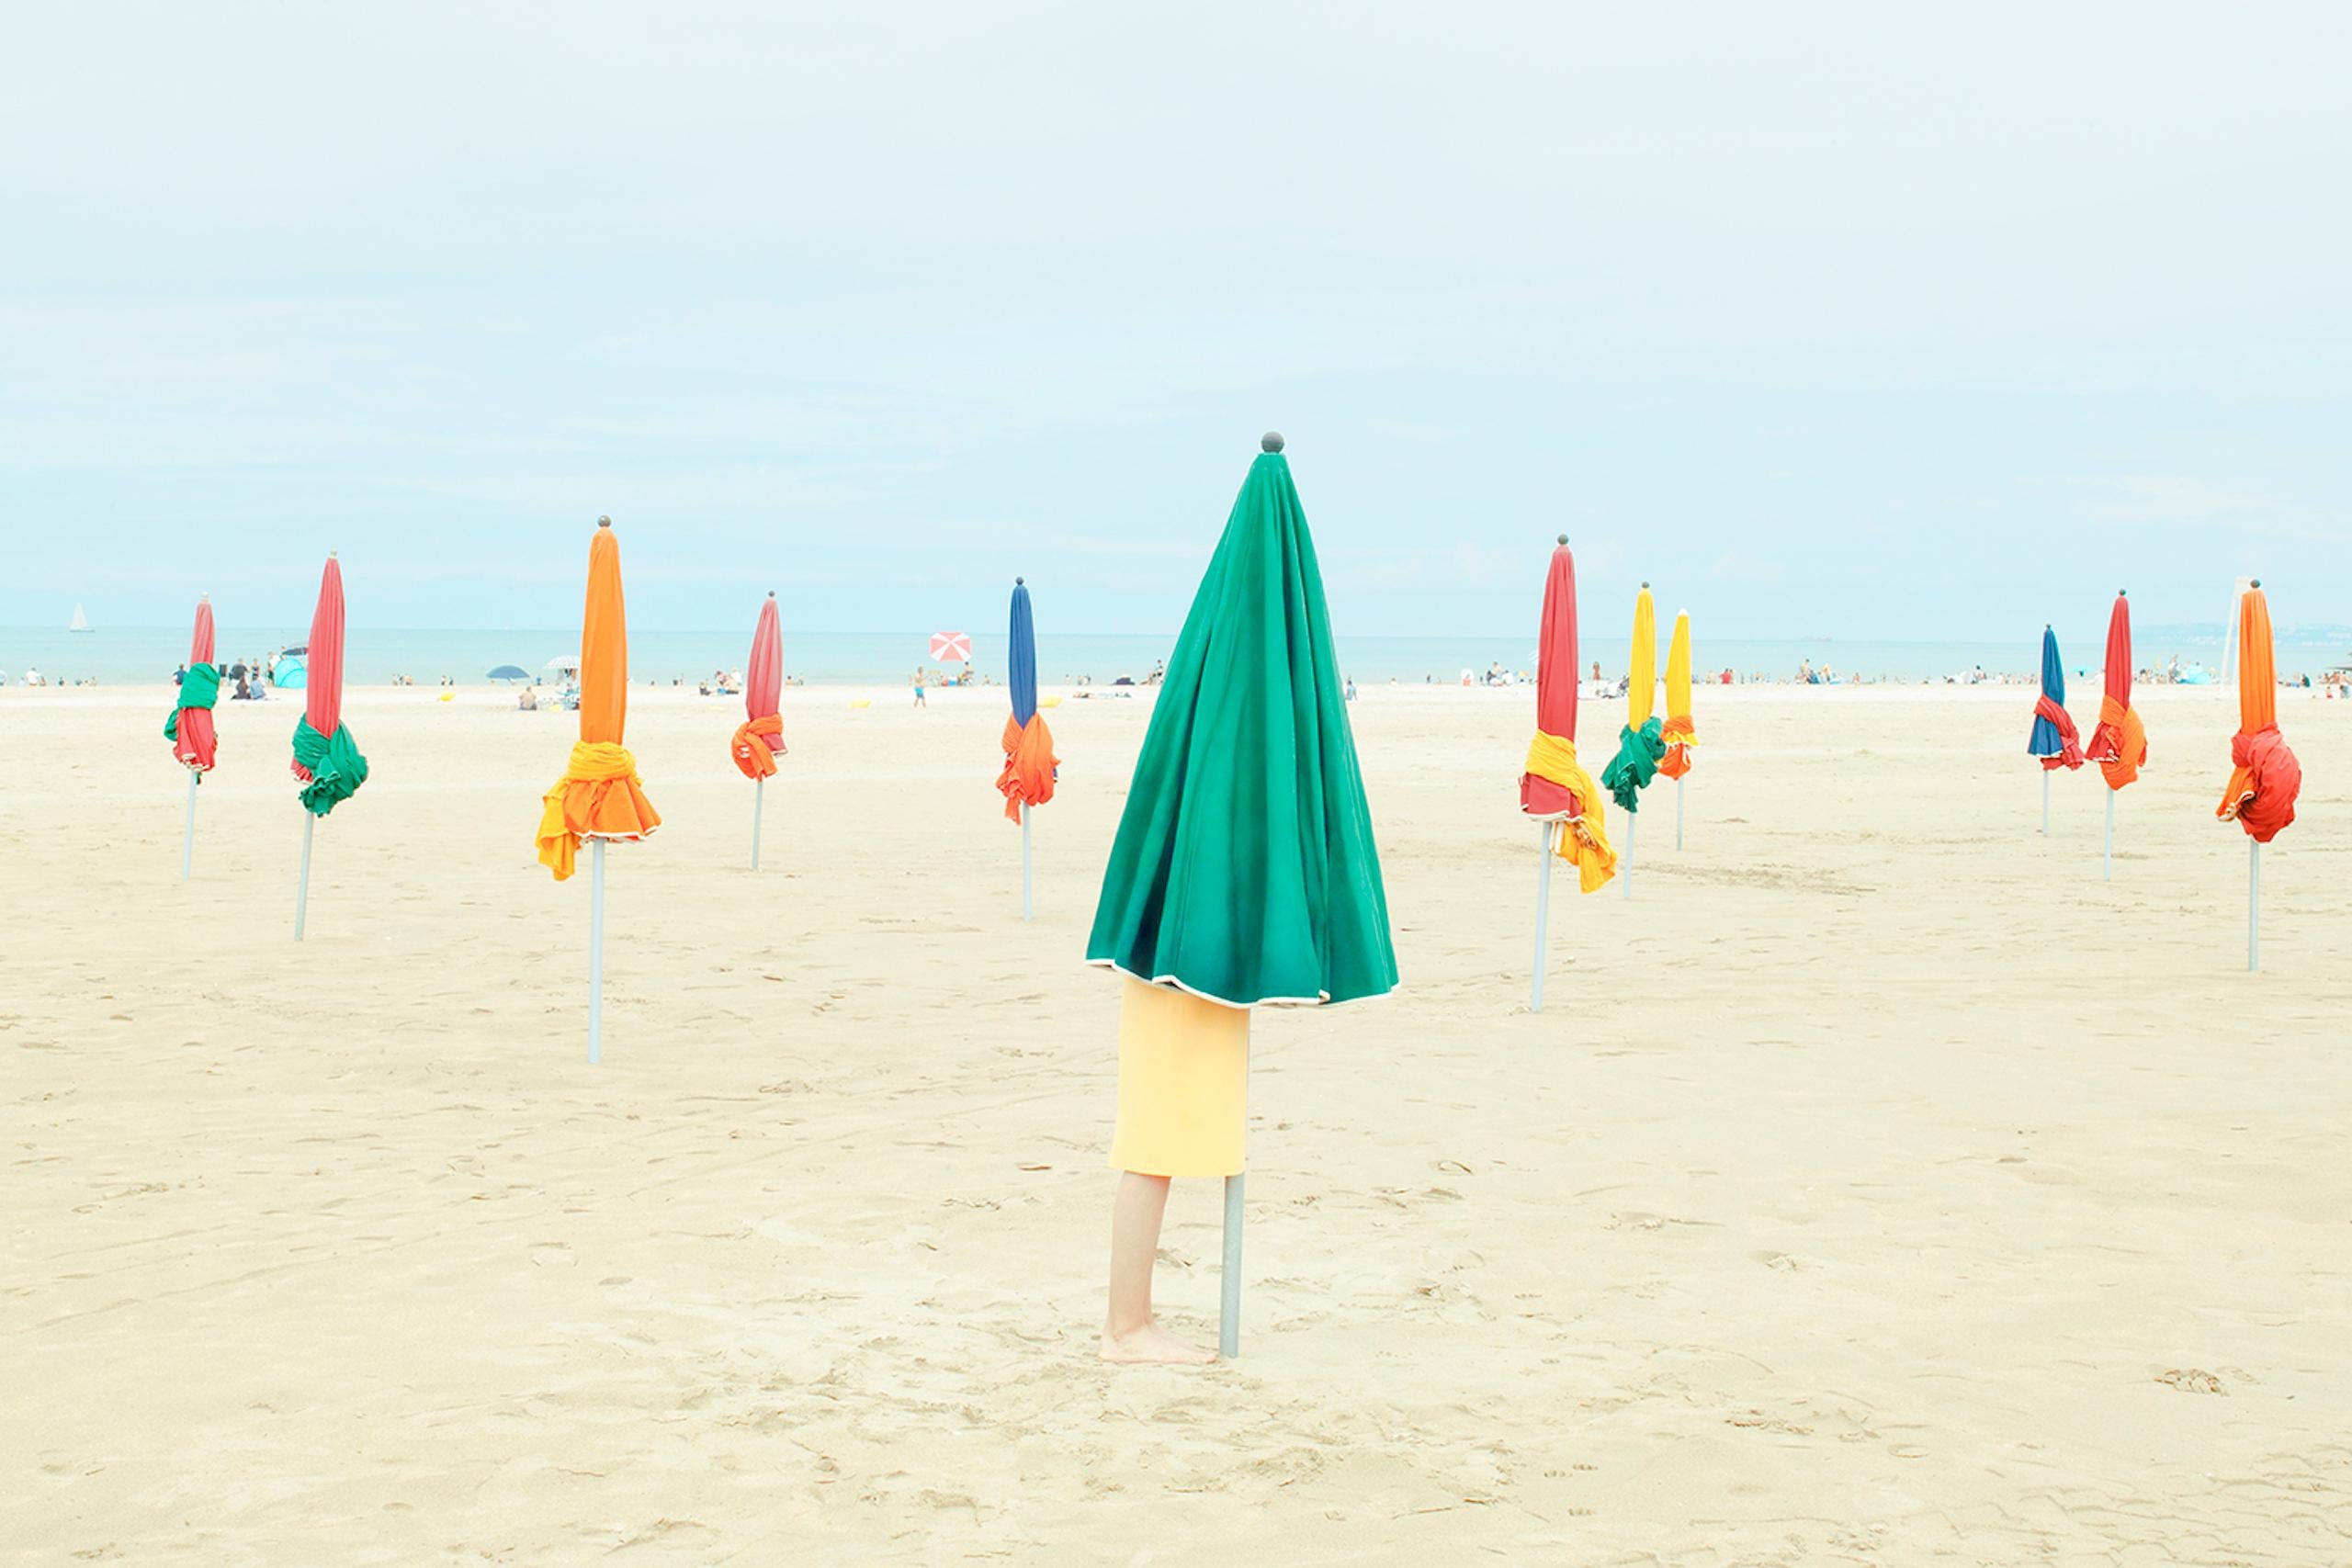 The beach is a photograph by French contemporary artist Camille Brasselet. 

This photograph is sold unframed as a print only. It is available in 2 dimensions:
*50 cm × 75 cm (19.7" × 29.5"), edition of 15 copies
*80 cm × 120 cm (31.5" × 47.2"),